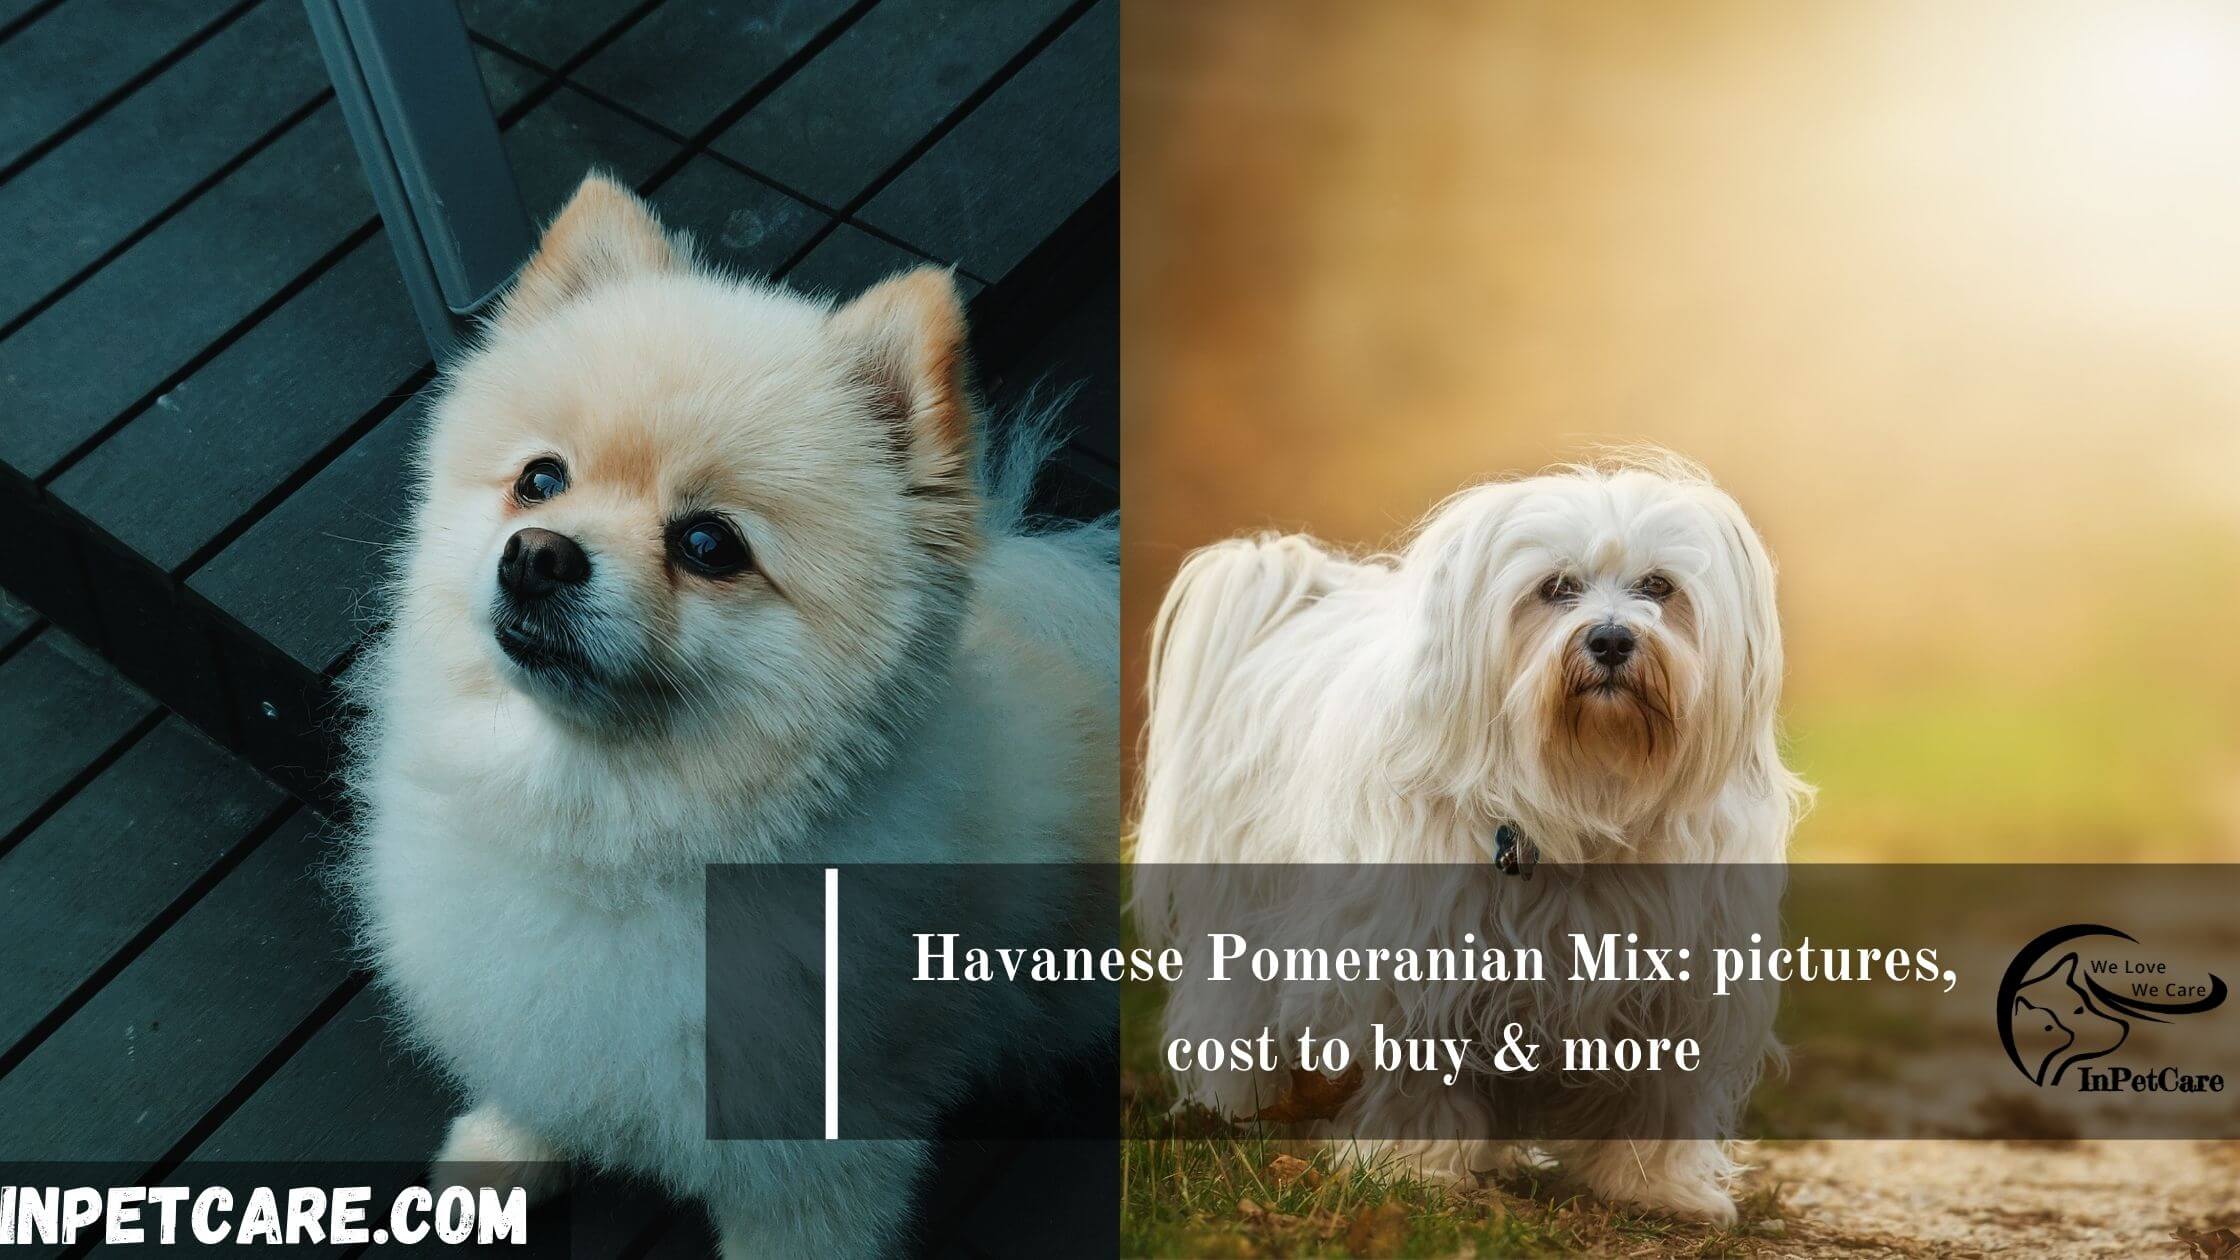 Havanese Pomeranian Mix: pictures, cost to buy & more